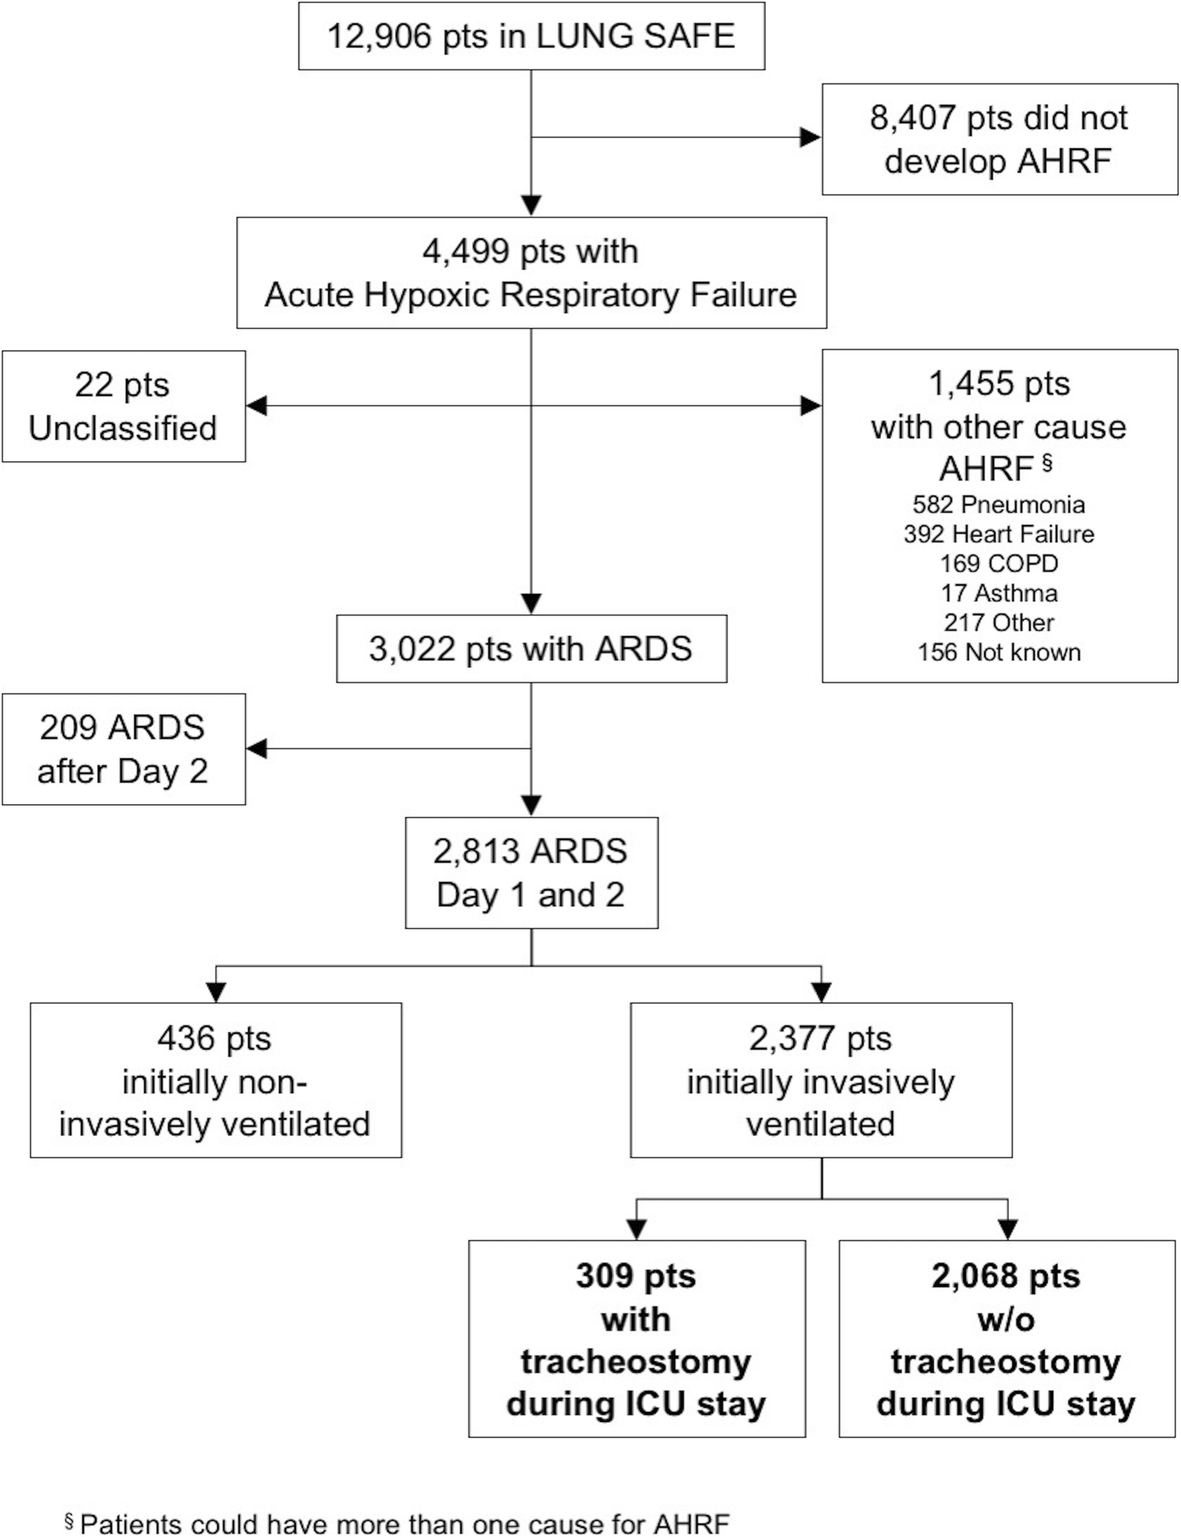 Epidemiology And Patterns Of Tracheostomy Practice In Patients